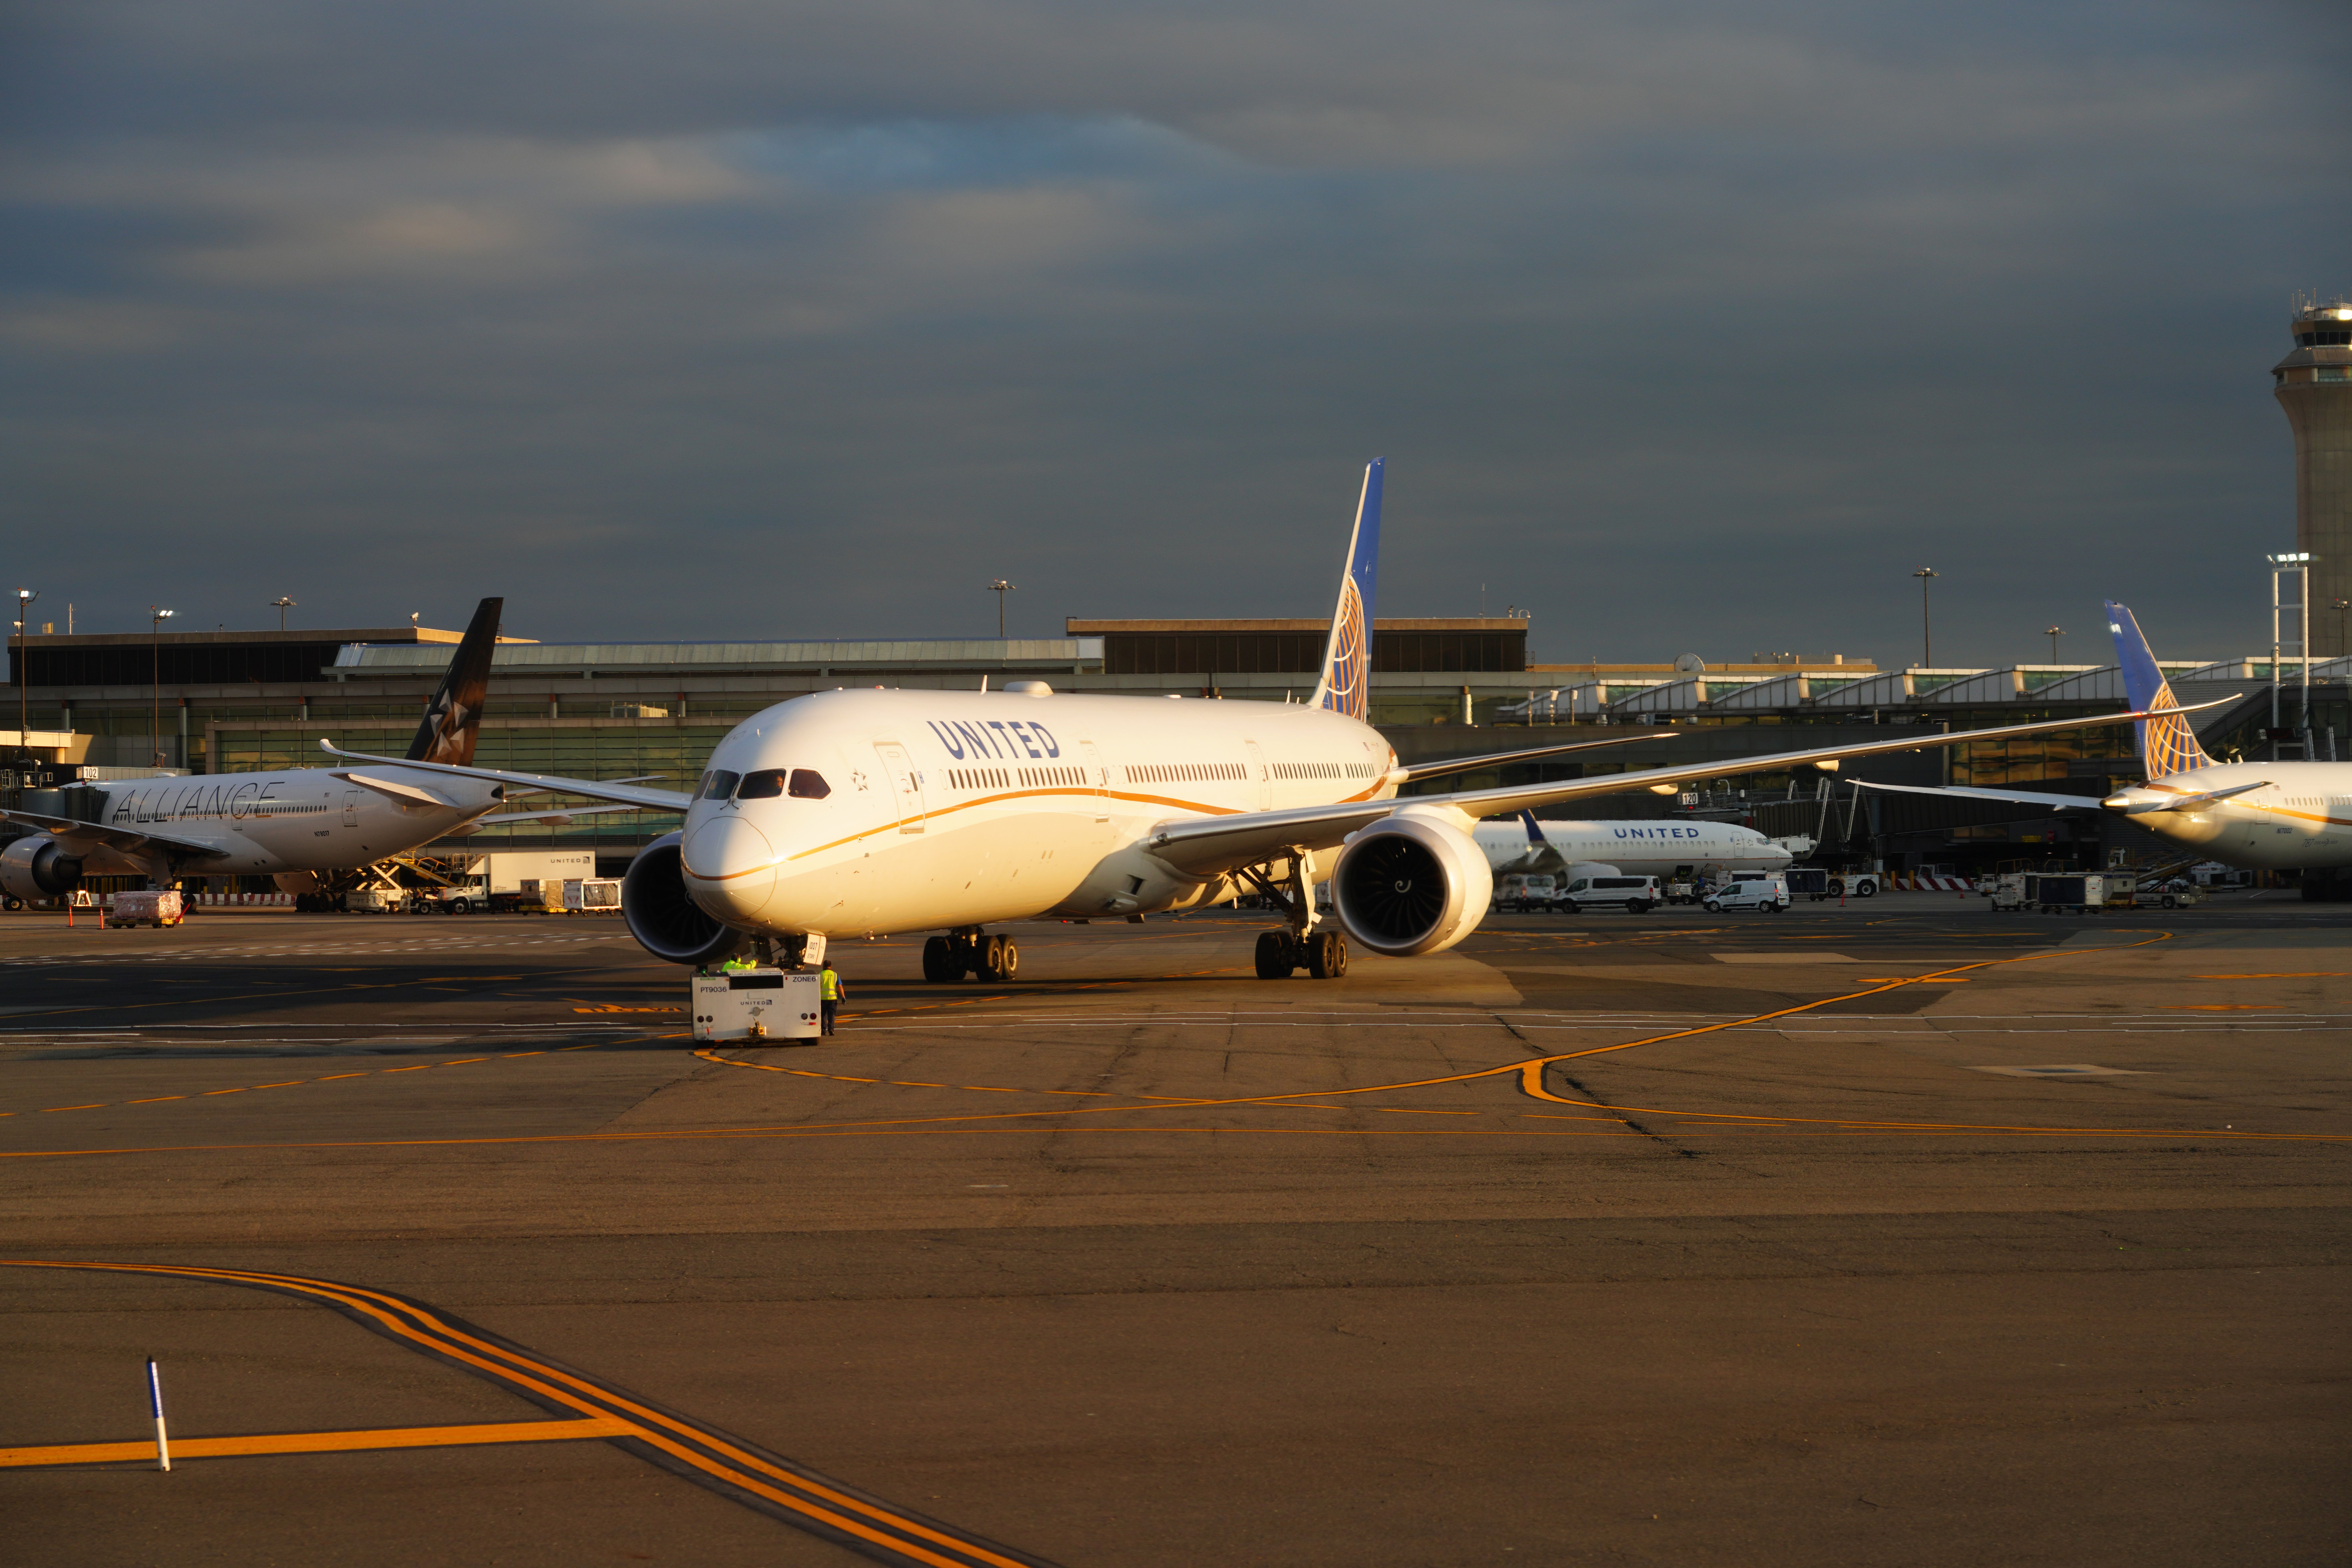 View of airplanes from United Airlines (UA) at Newark Liberty International Airport (EWR)